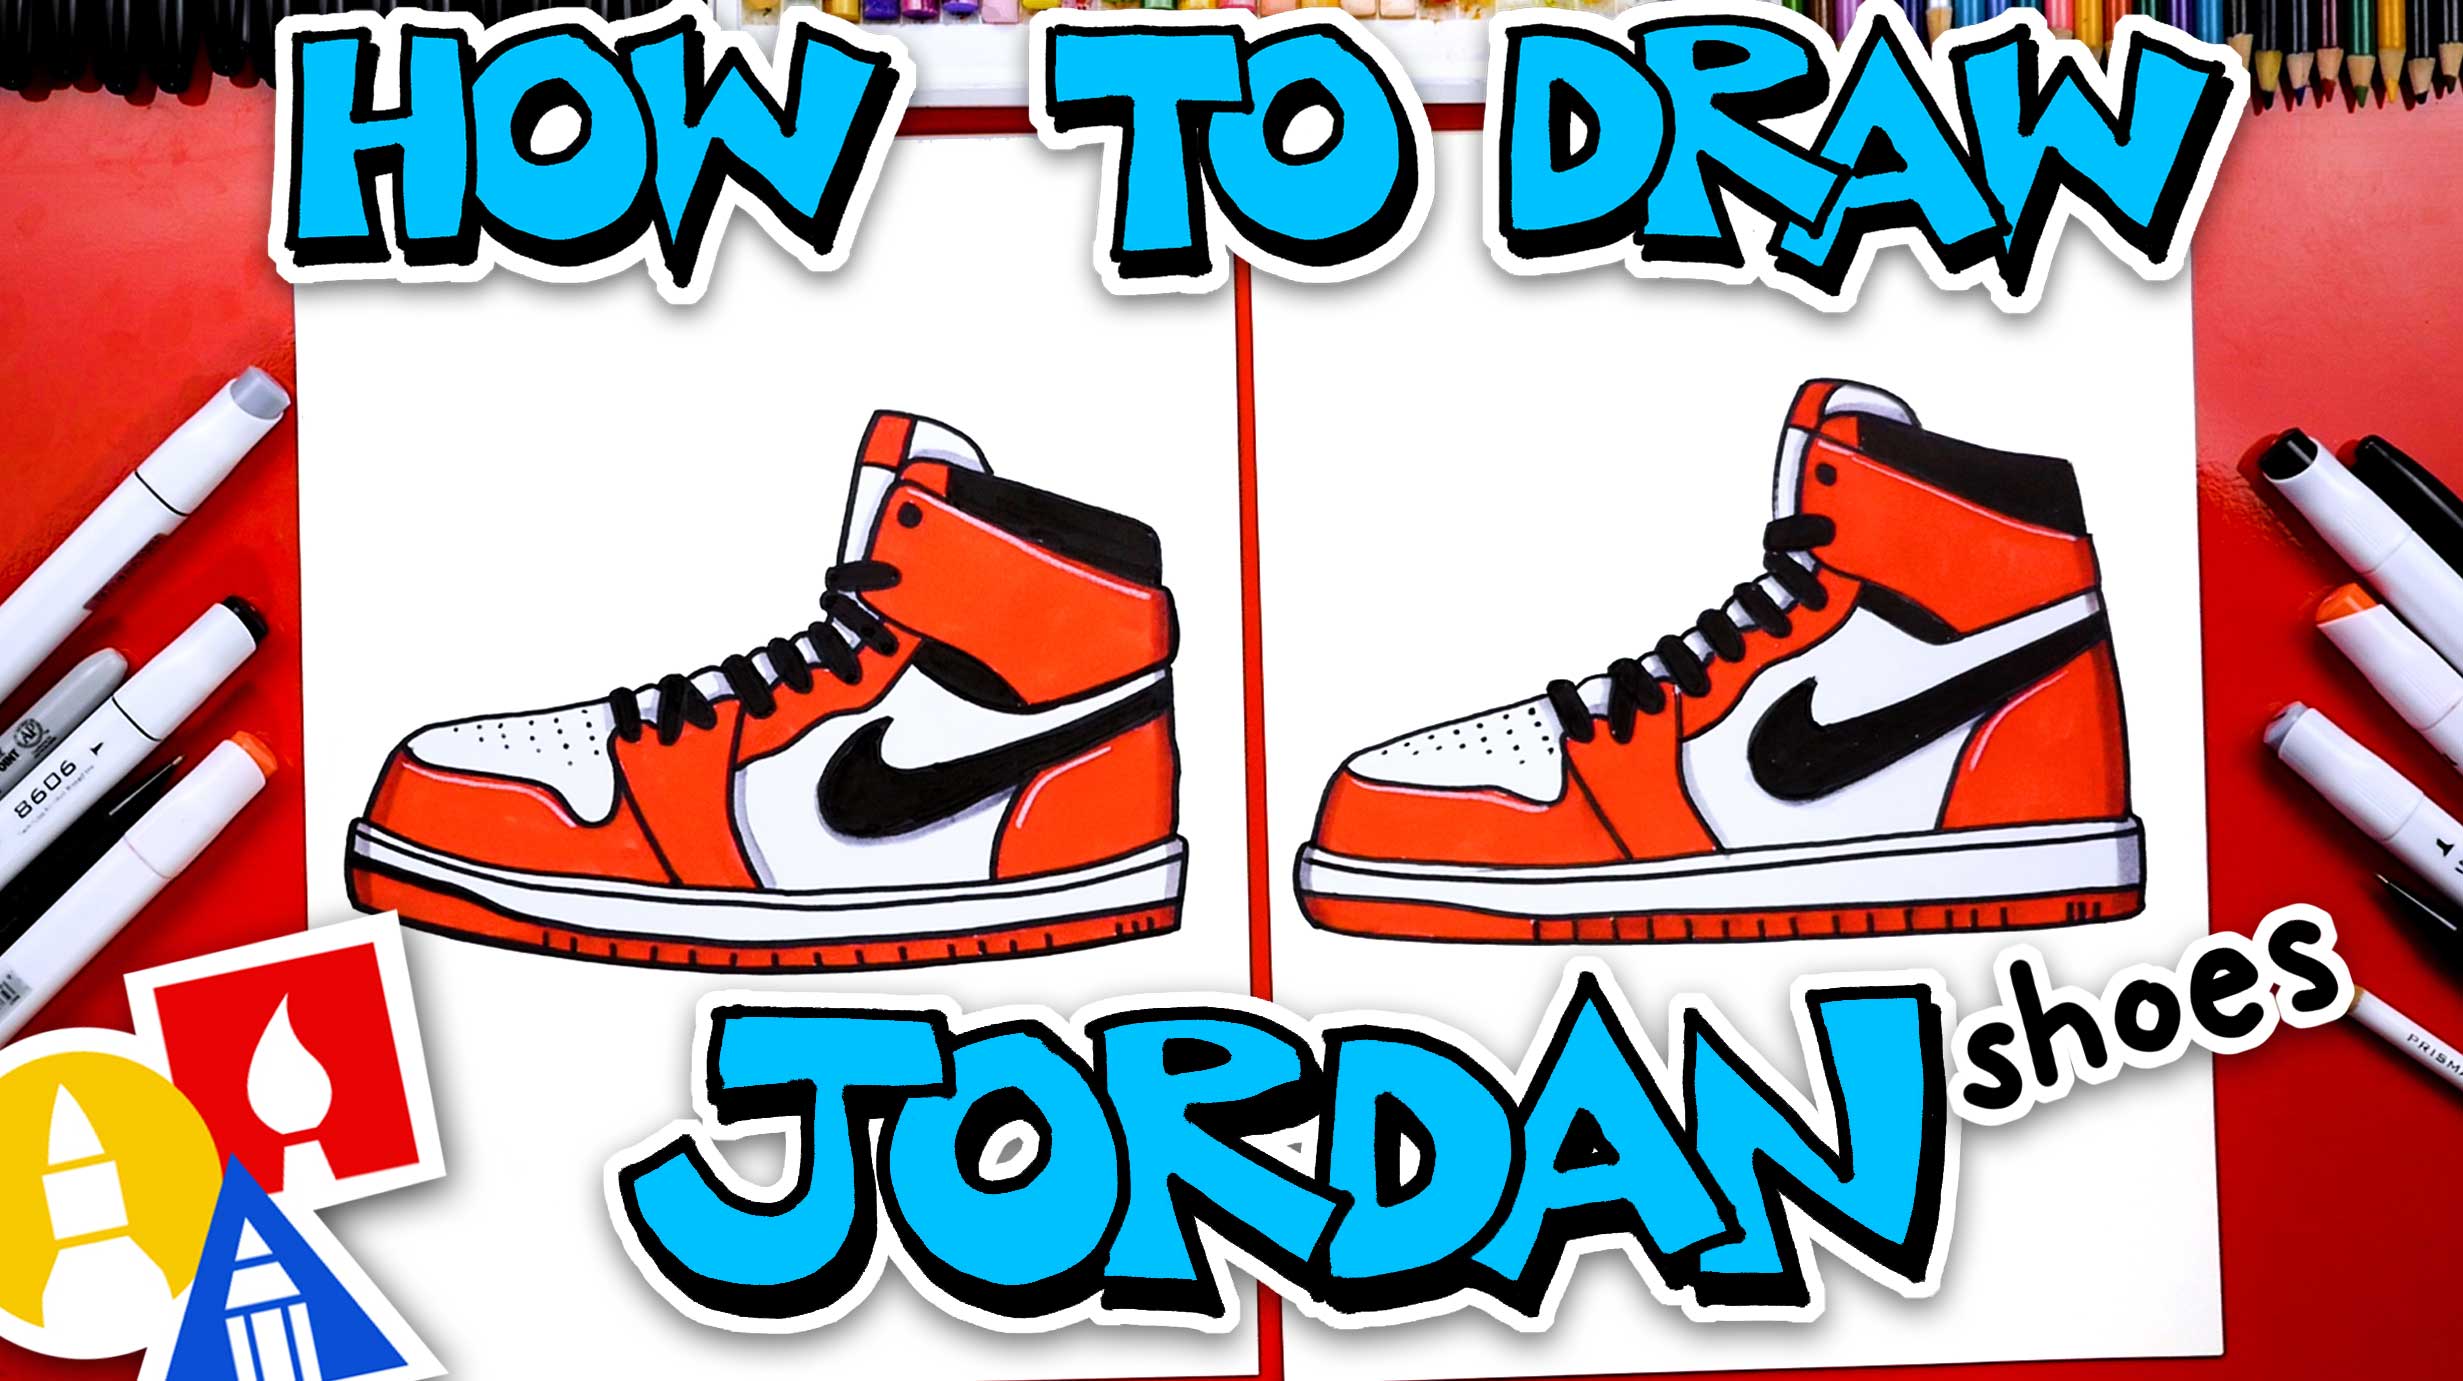 How To Draw A Shoe (Air Jordan 1) | vlr.eng.br